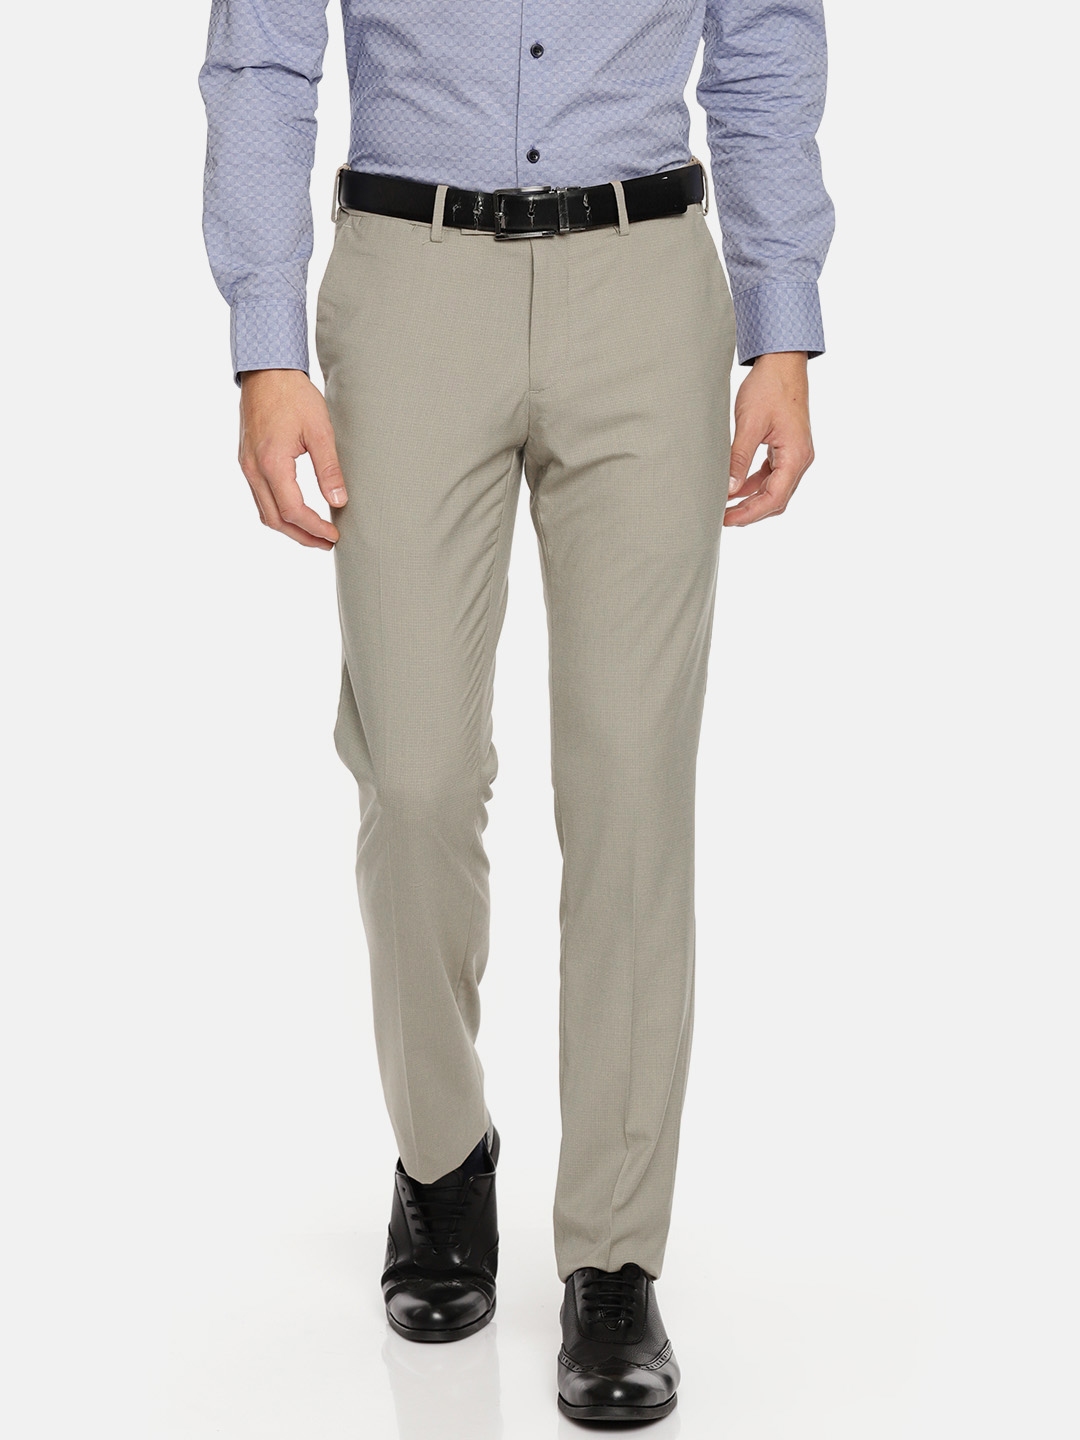 US POLO ASSN Men Beige Mid Rise Solid Formal Trousers Buy US POLO ASSN  Men Beige Mid Rise Solid Formal Trousers Online at Best Price in India   NykaaMan